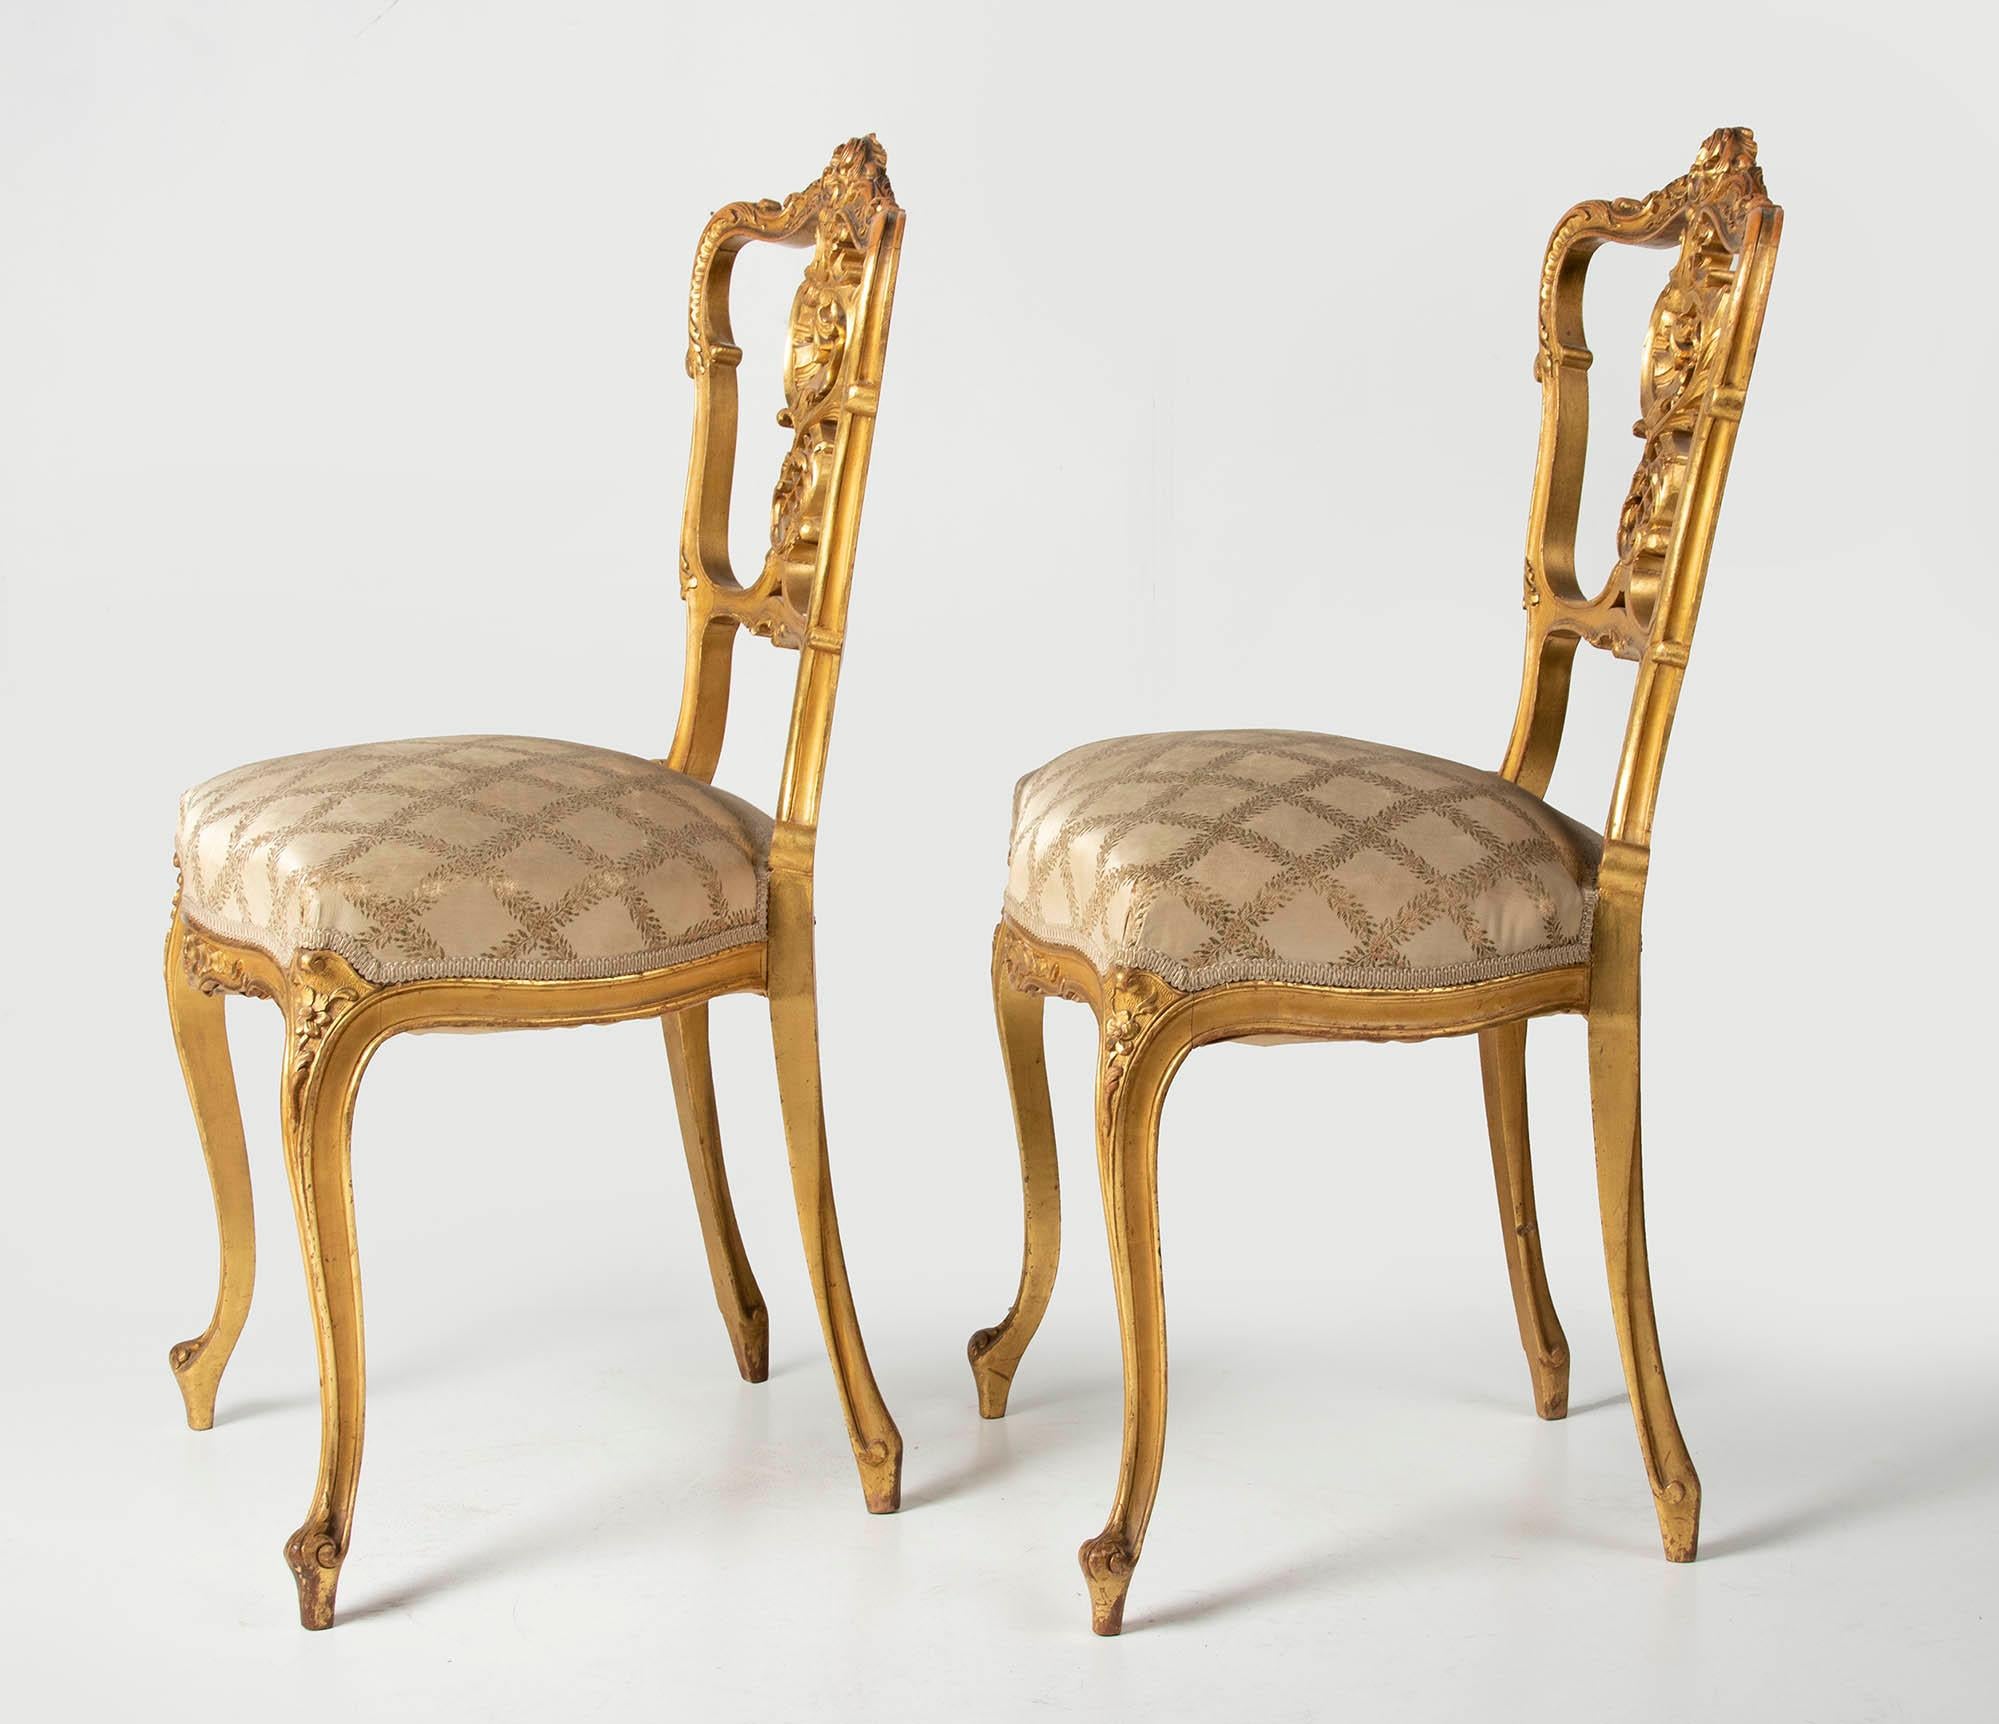 Pair of 19th Century Louis XV Style French Gold-Leaf Gilded Chairs 6